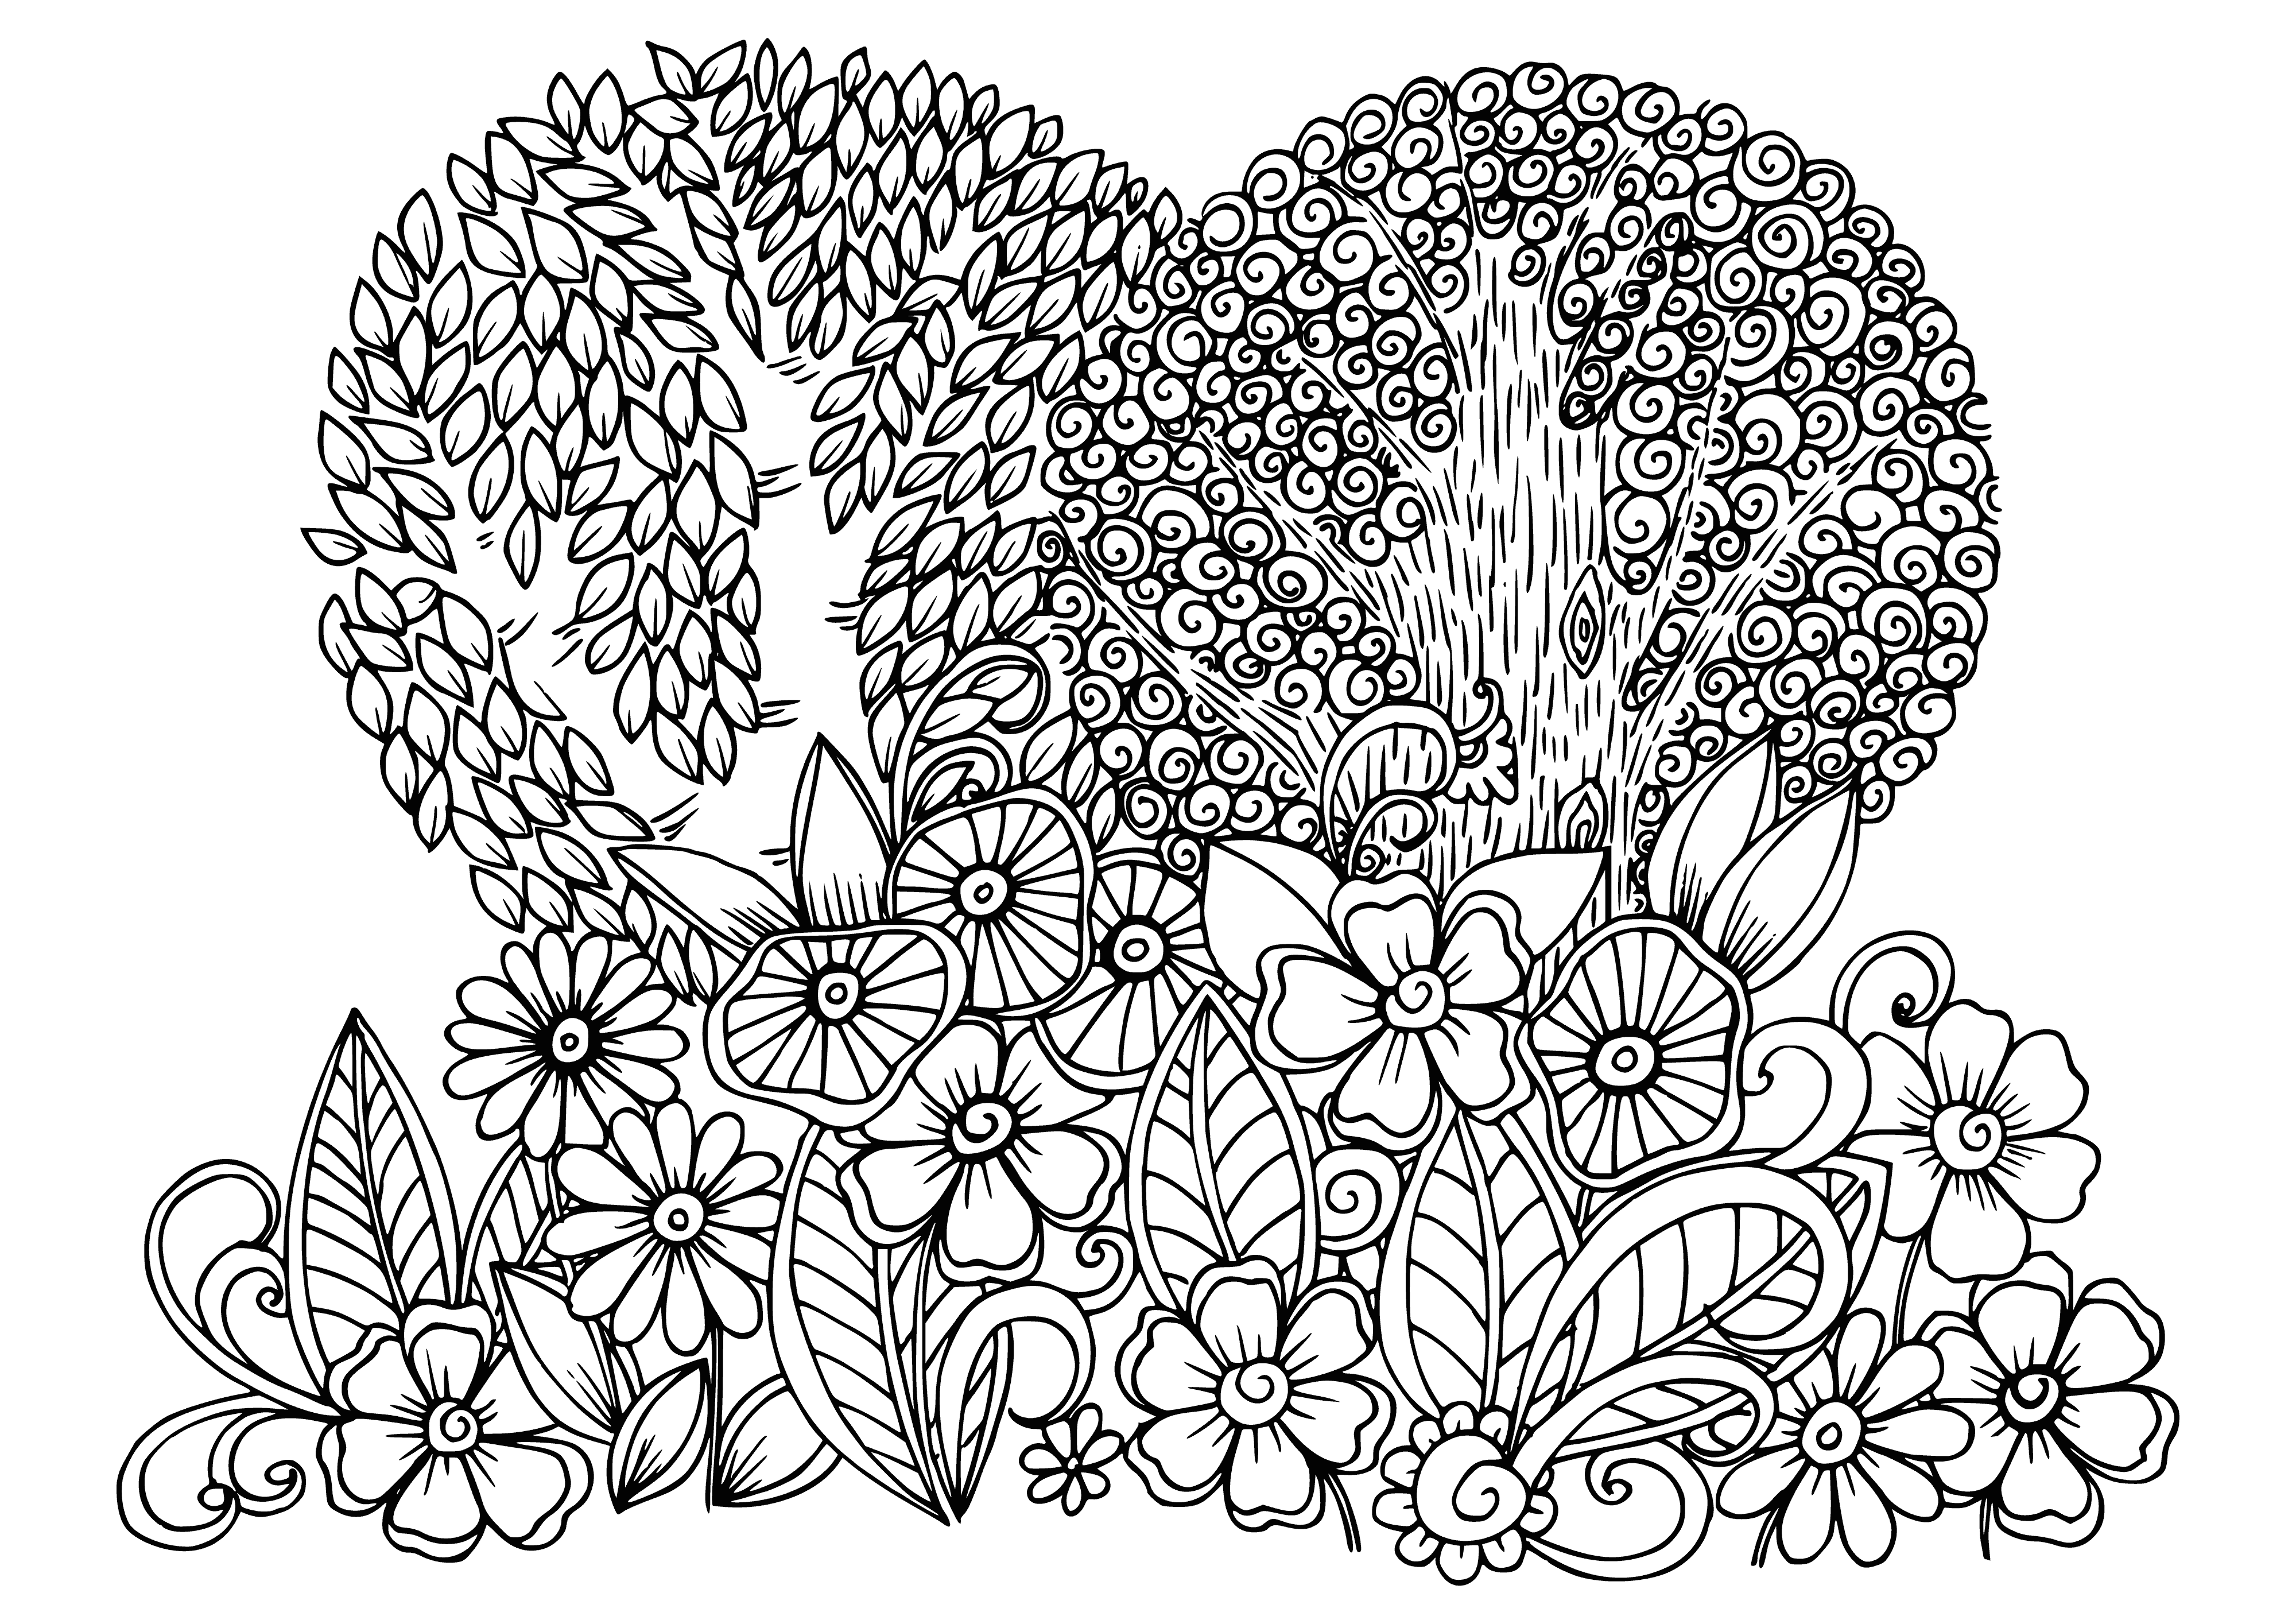 coloring page: Bright flowers of various colors fill this coloring page; yellows, whites, pinks & purples make up the delightful display!